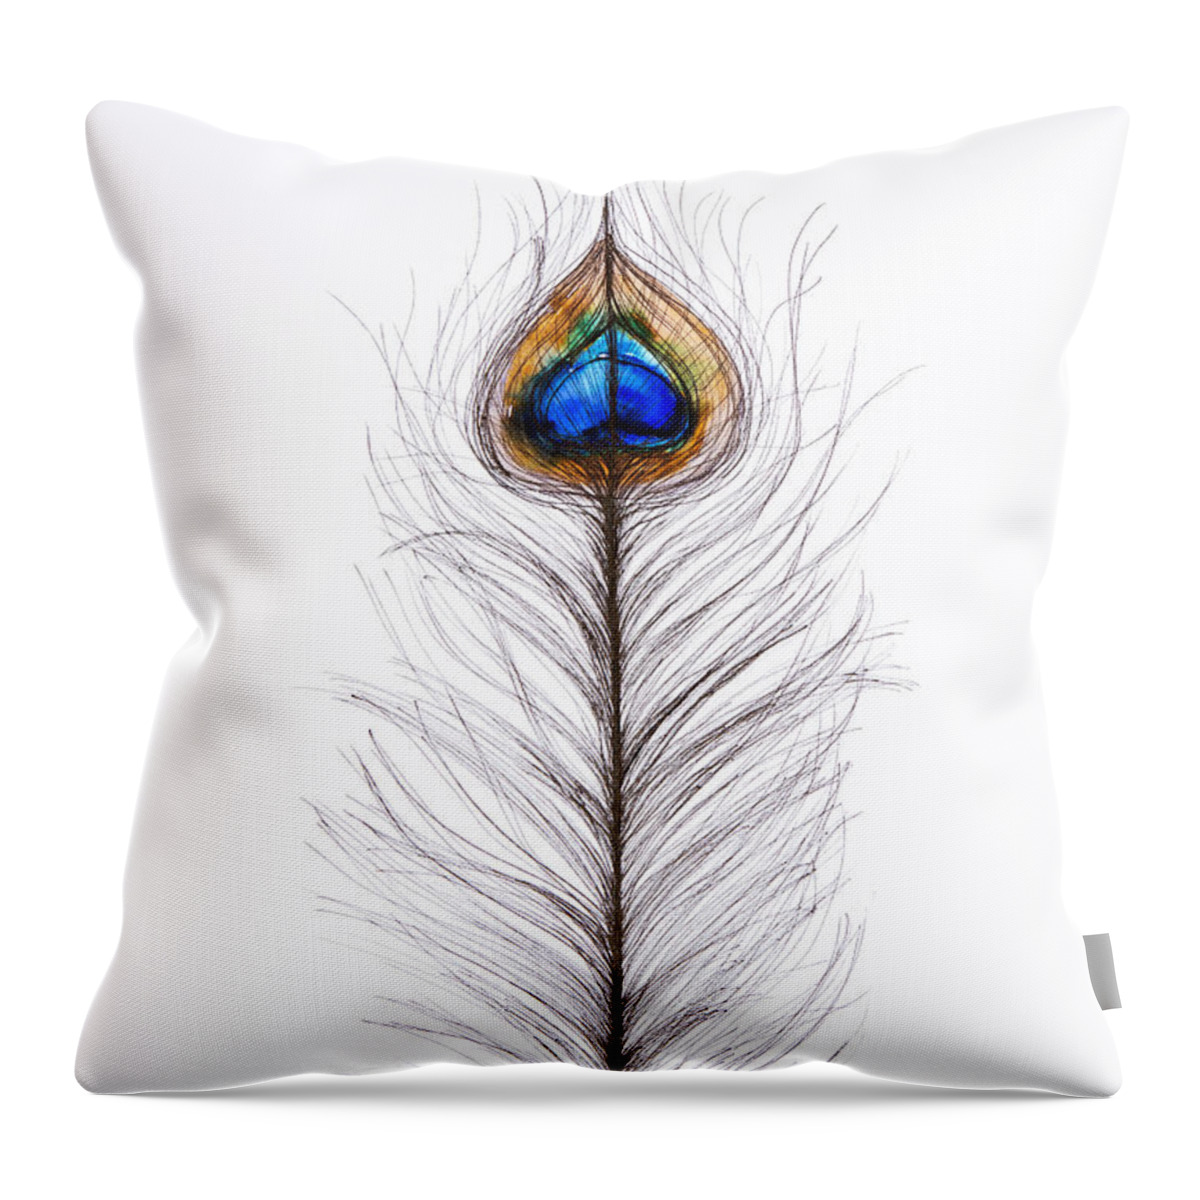 Abstract Throw Pillow featuring the painting Peacock Abstract by Tara Thelen